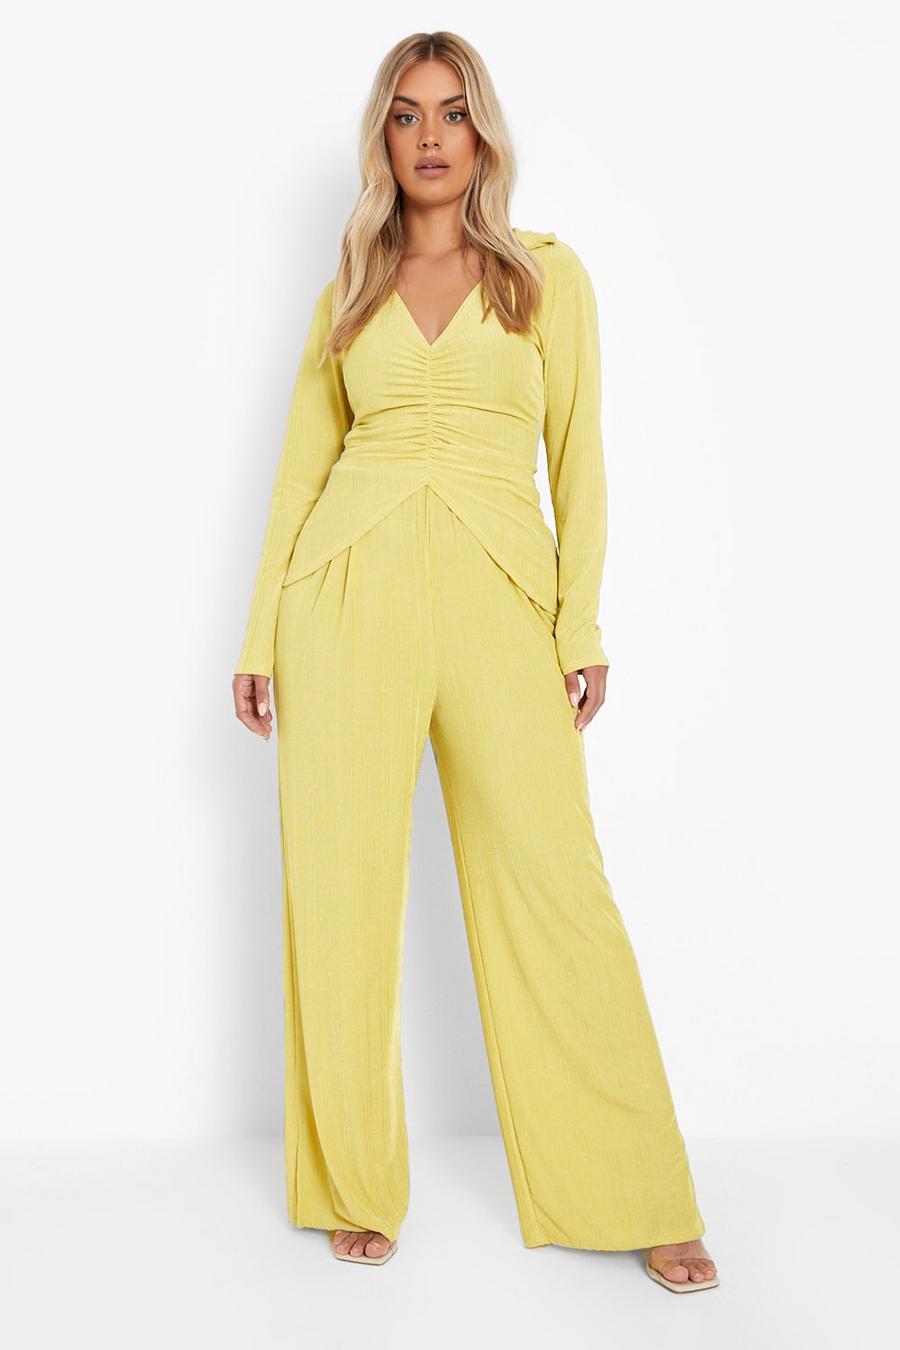 Pantaloni Plus Size a coste con spacco, Mustard image number 1